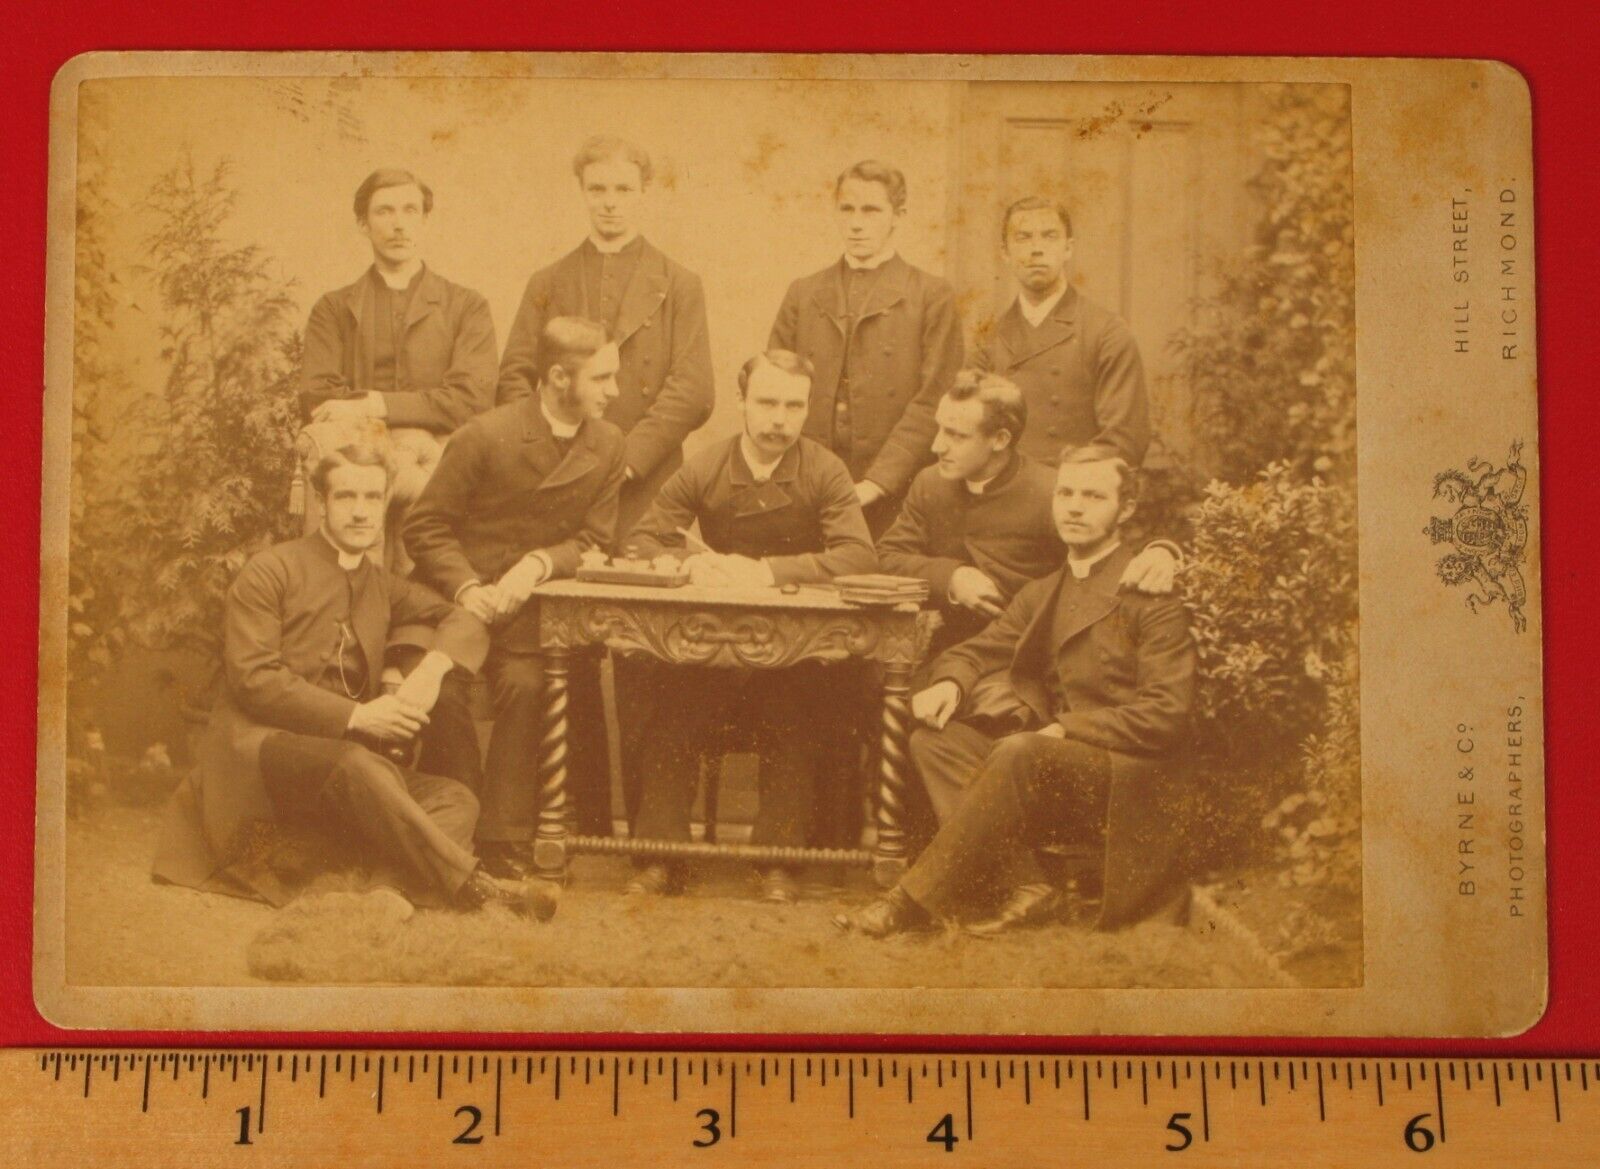 ORIGINAL ANTIQUE CABINET CARD PHOTOGRAPH OF GROUP OF PRIEST PASTORS HOLY 